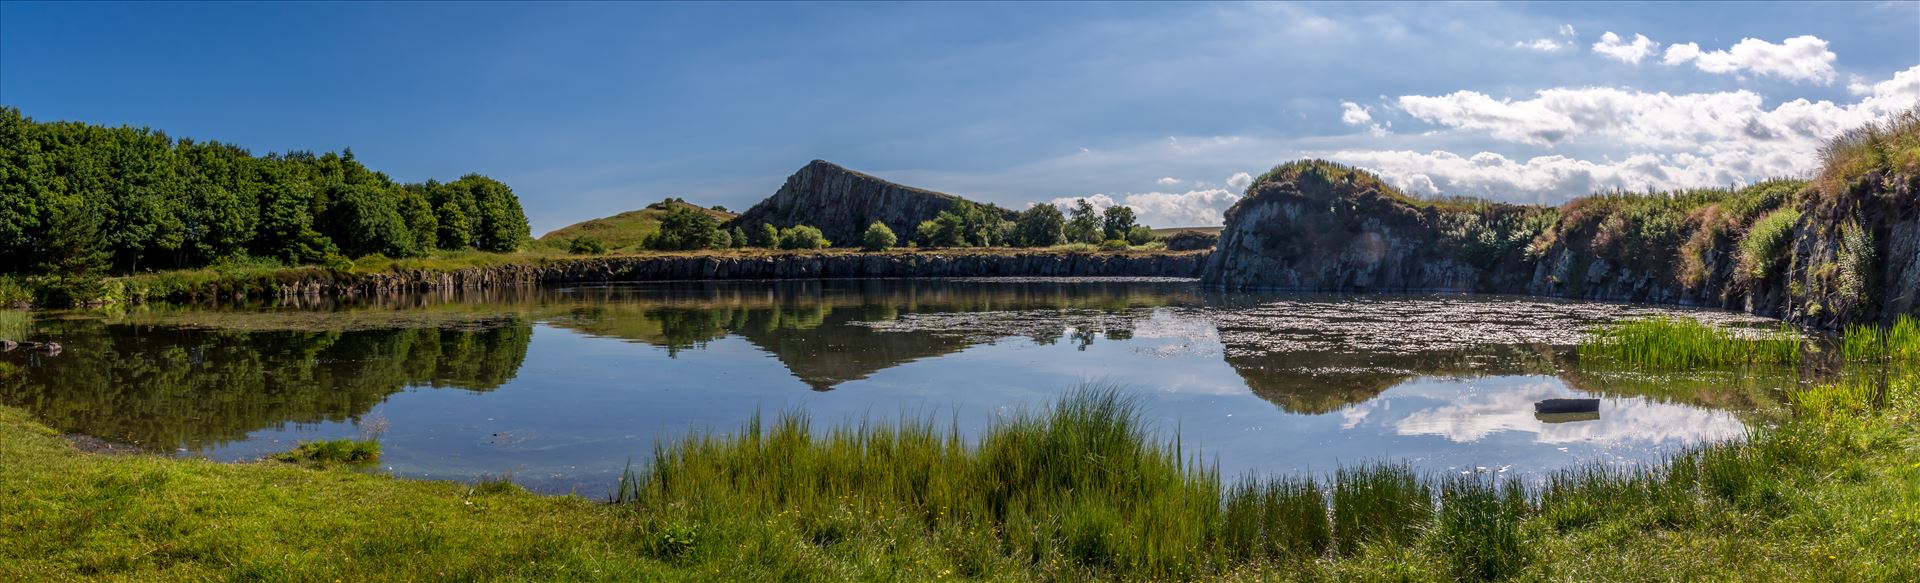 Cawfields Quarry Cawfields is a former quarry cutting dramatically through the Wall and the underlying Whin Sill dolerite bedrock. It comprises a large pond and car park with good walking access to Milecastle 42 on the Roman Wall. by philreay